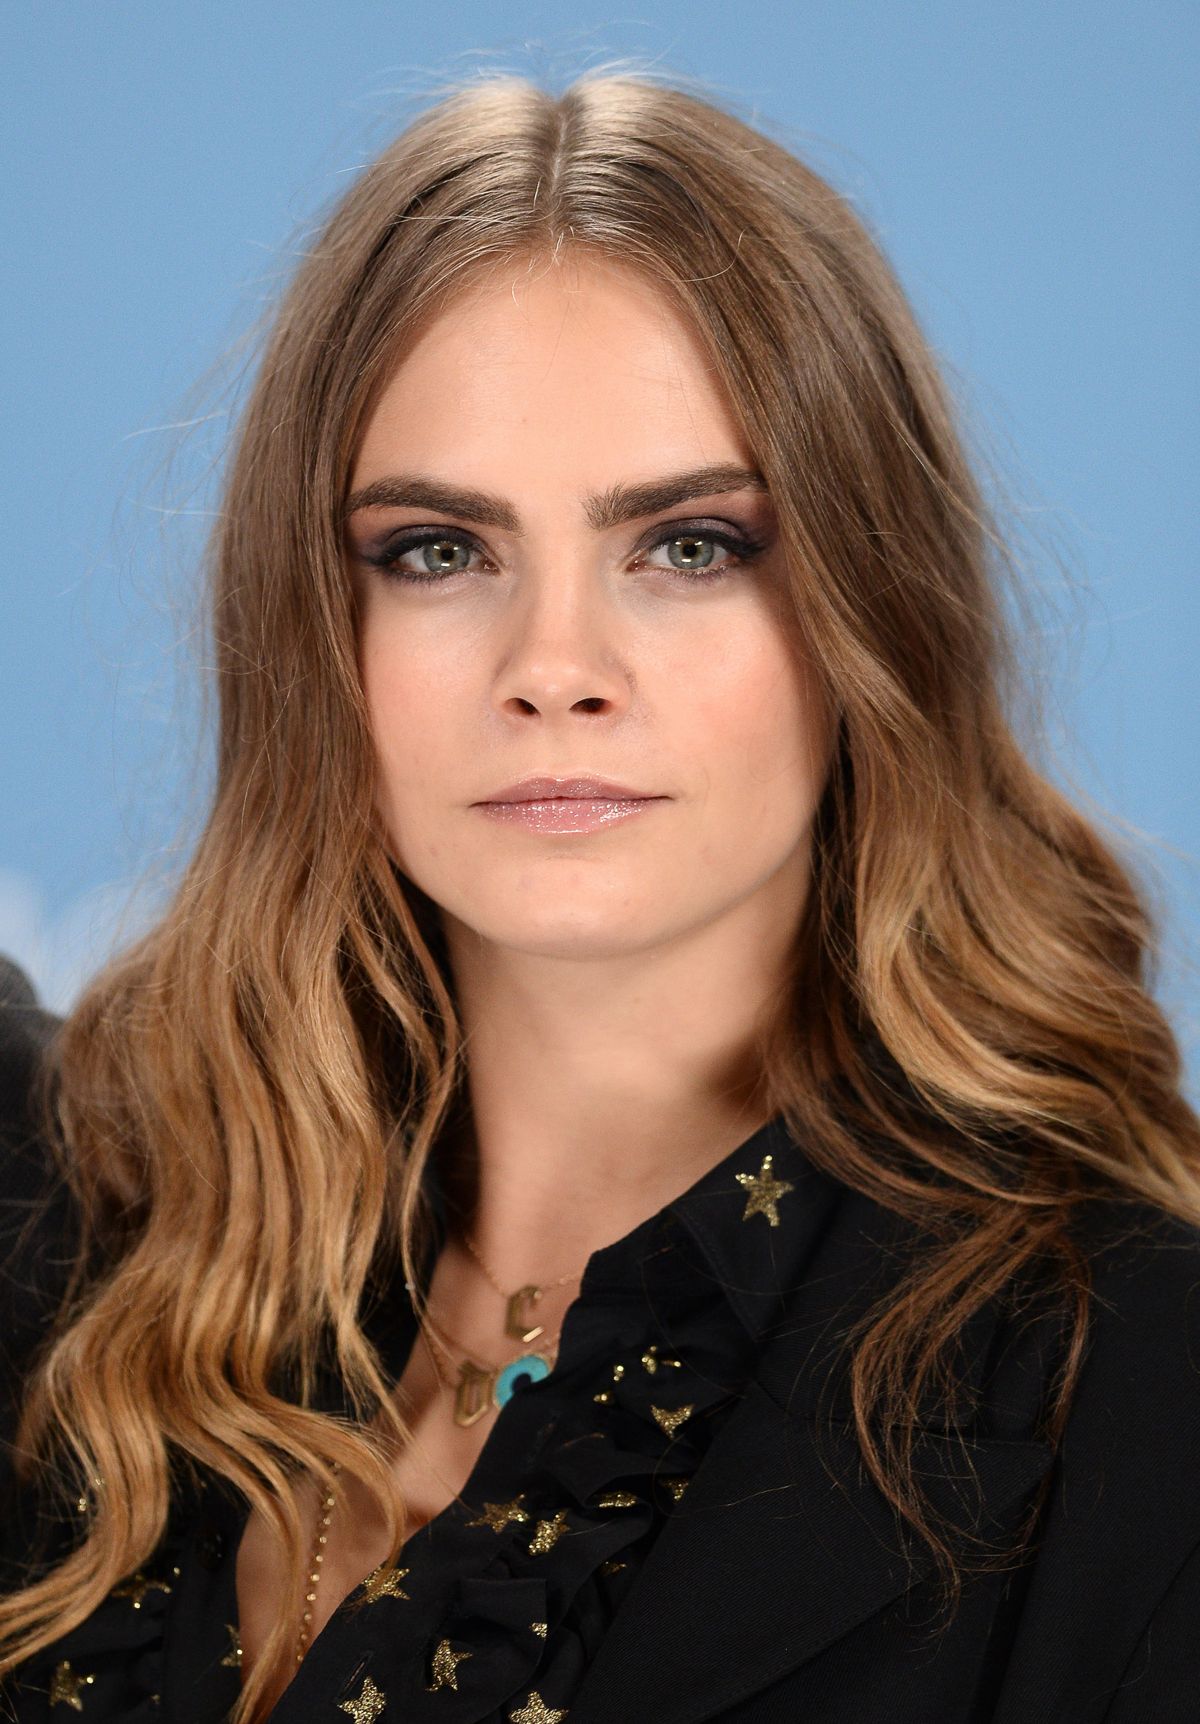 CARA DELEVINGNE at Paper Towns Press Tour in London – HawtCelebs